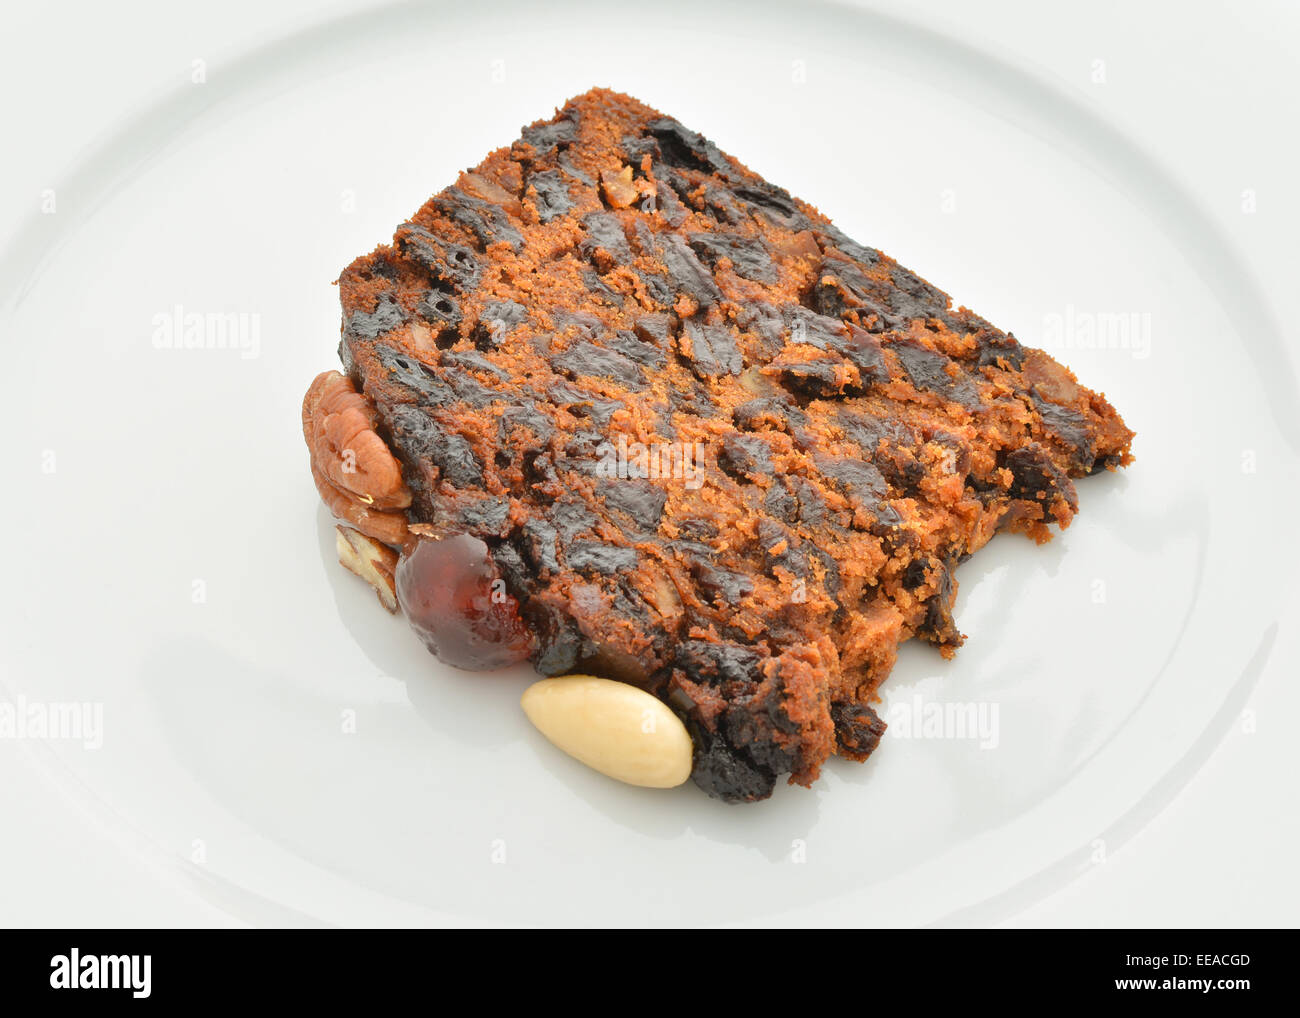 Slice of homemade fruitcake decorated with nuts and cherries on white plate Stock Photo